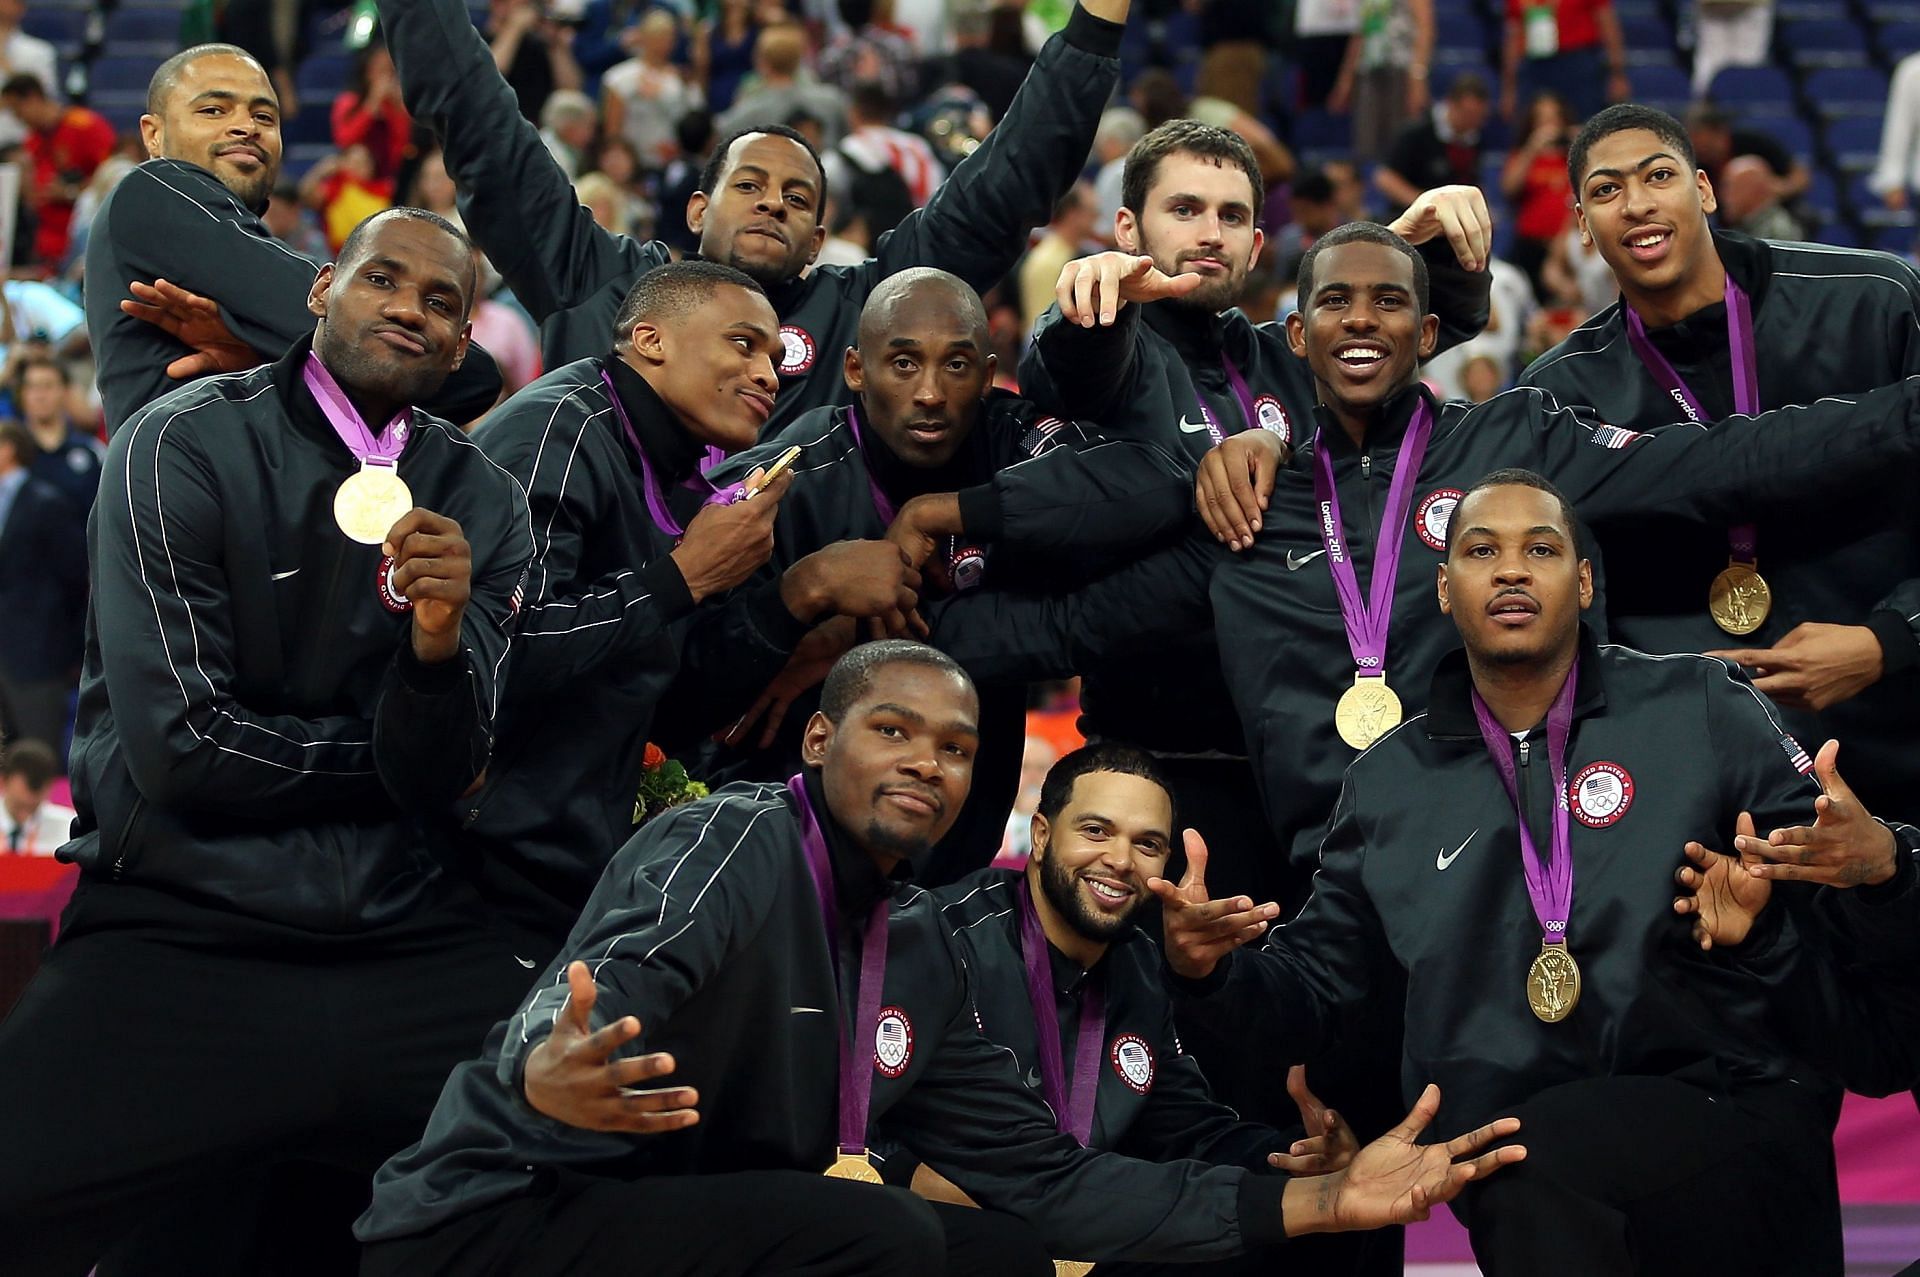 Former Finals MVP thinks 2012 Olympic Team would beat 1992 Dream Team